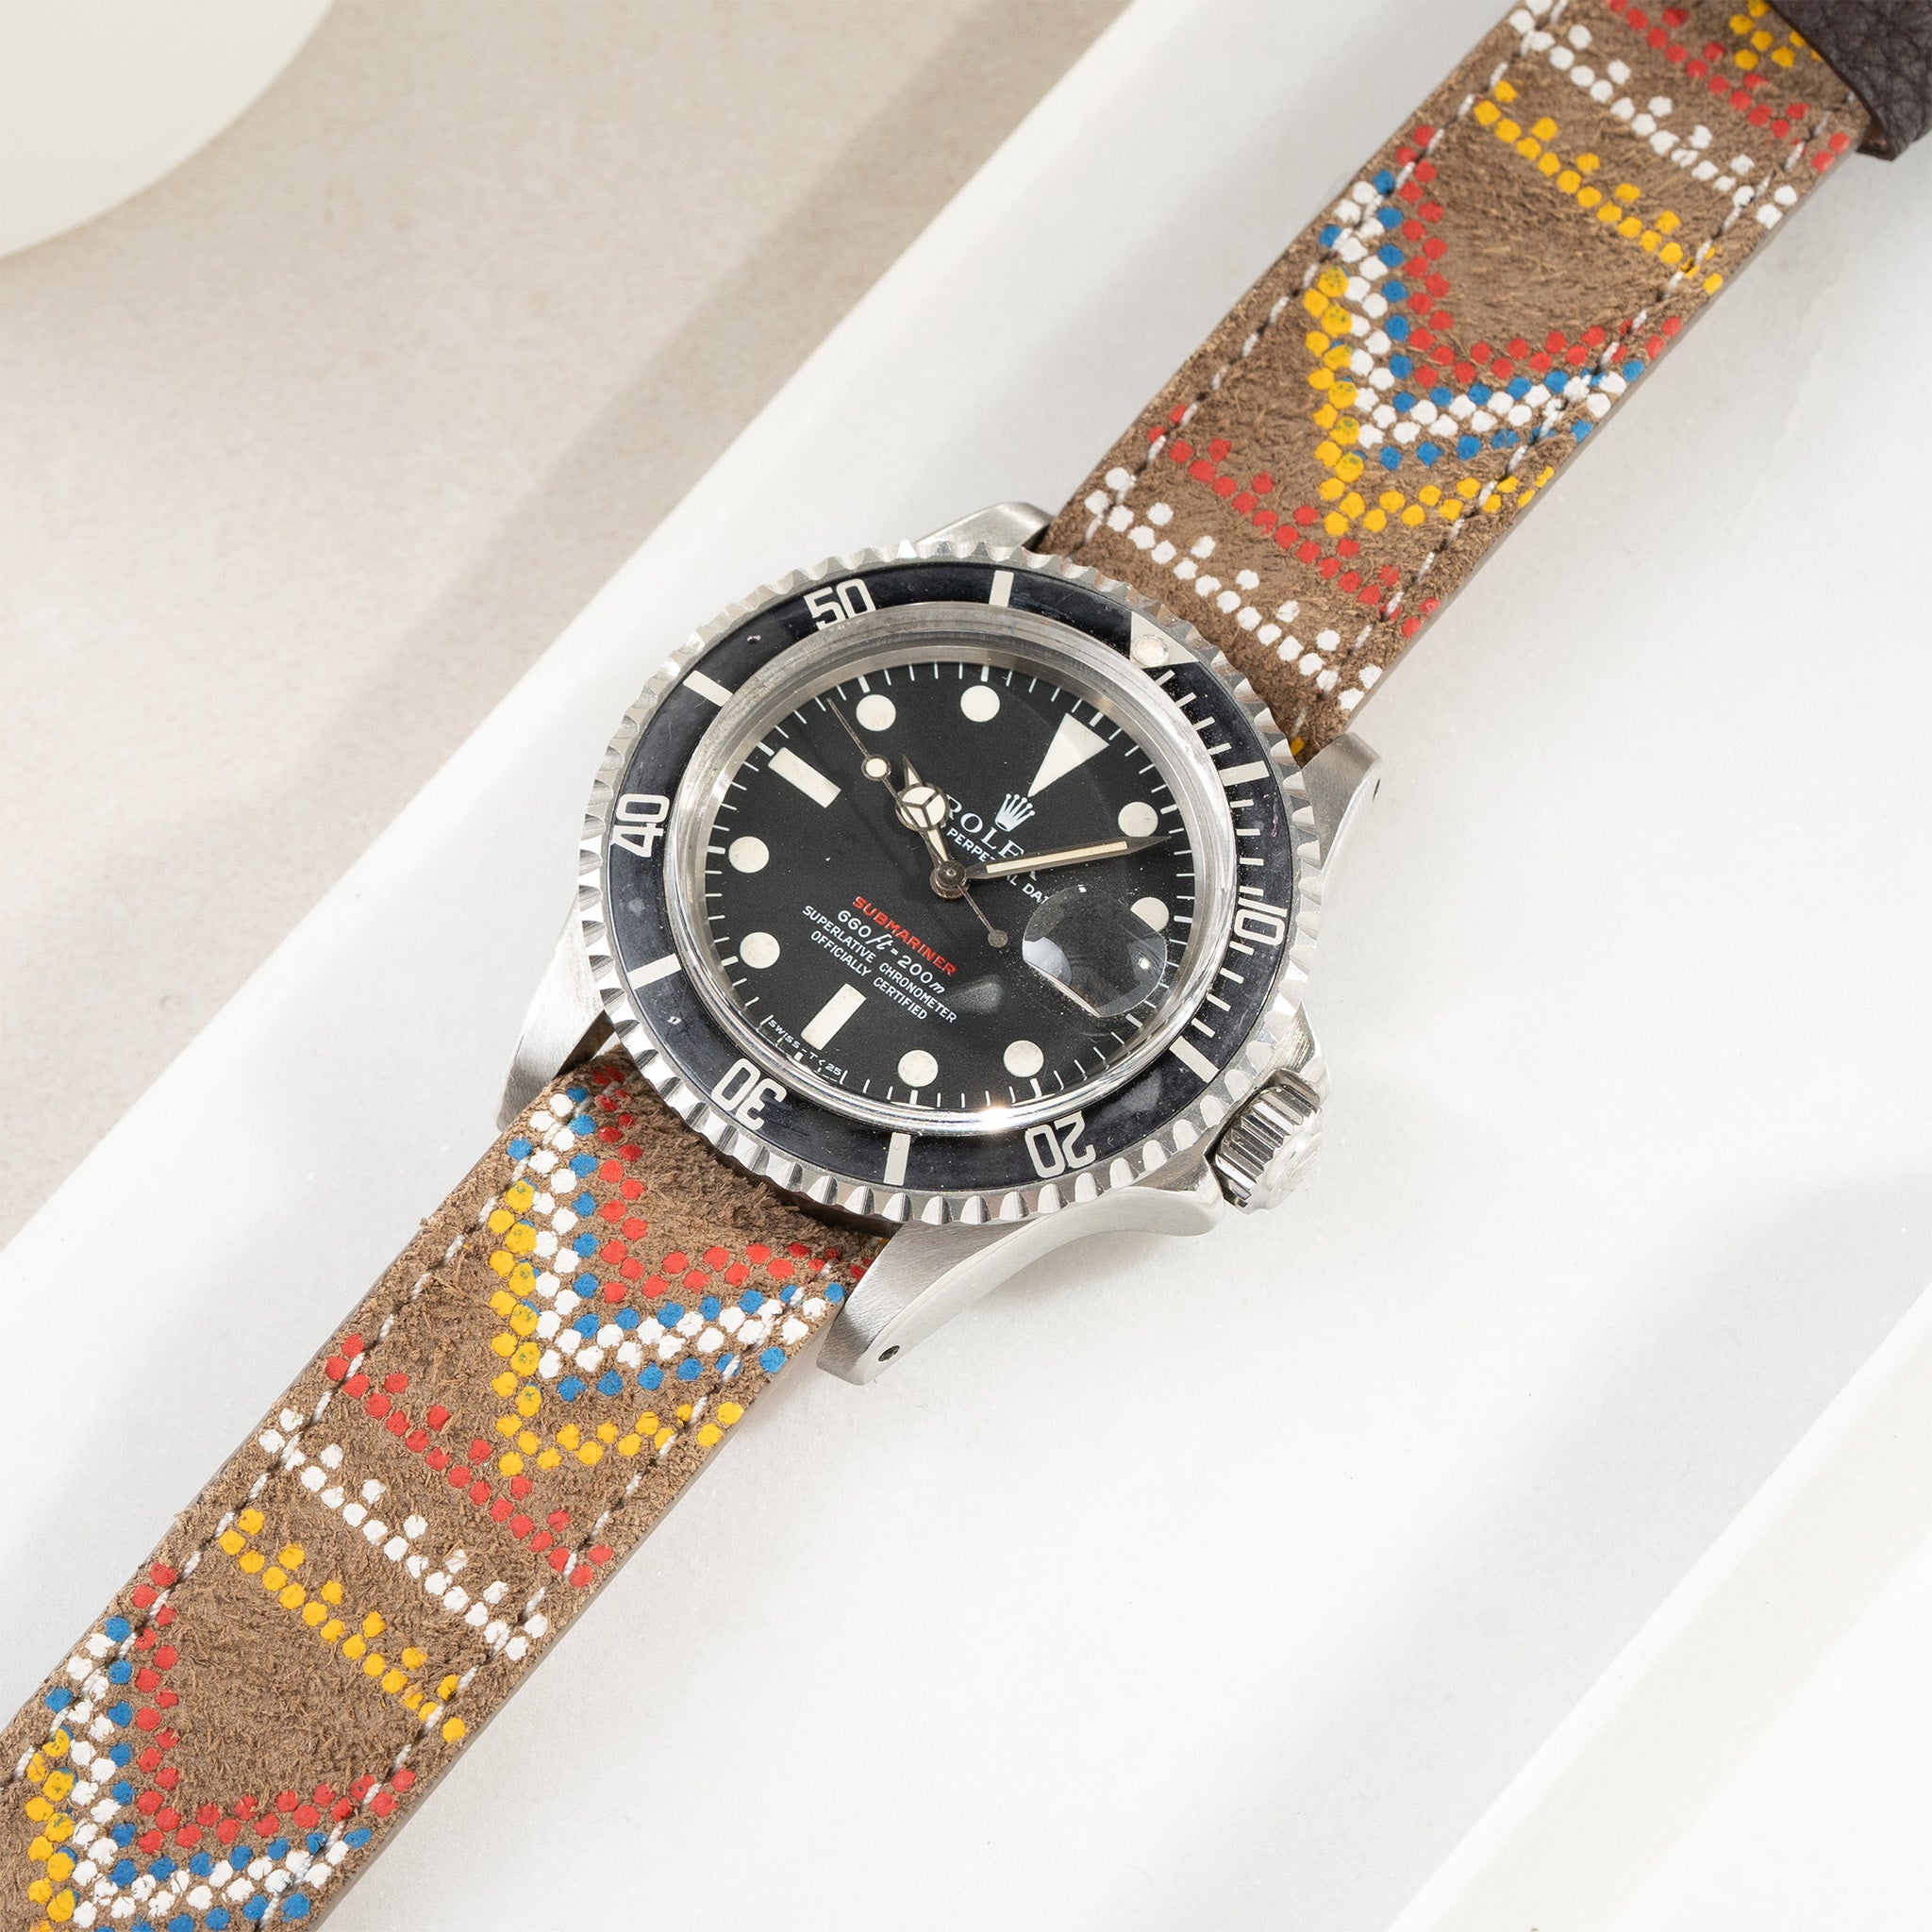 native_style_single_pass_brown_leather_watch_strap_Rolex_Red_submariner_1680_MK4